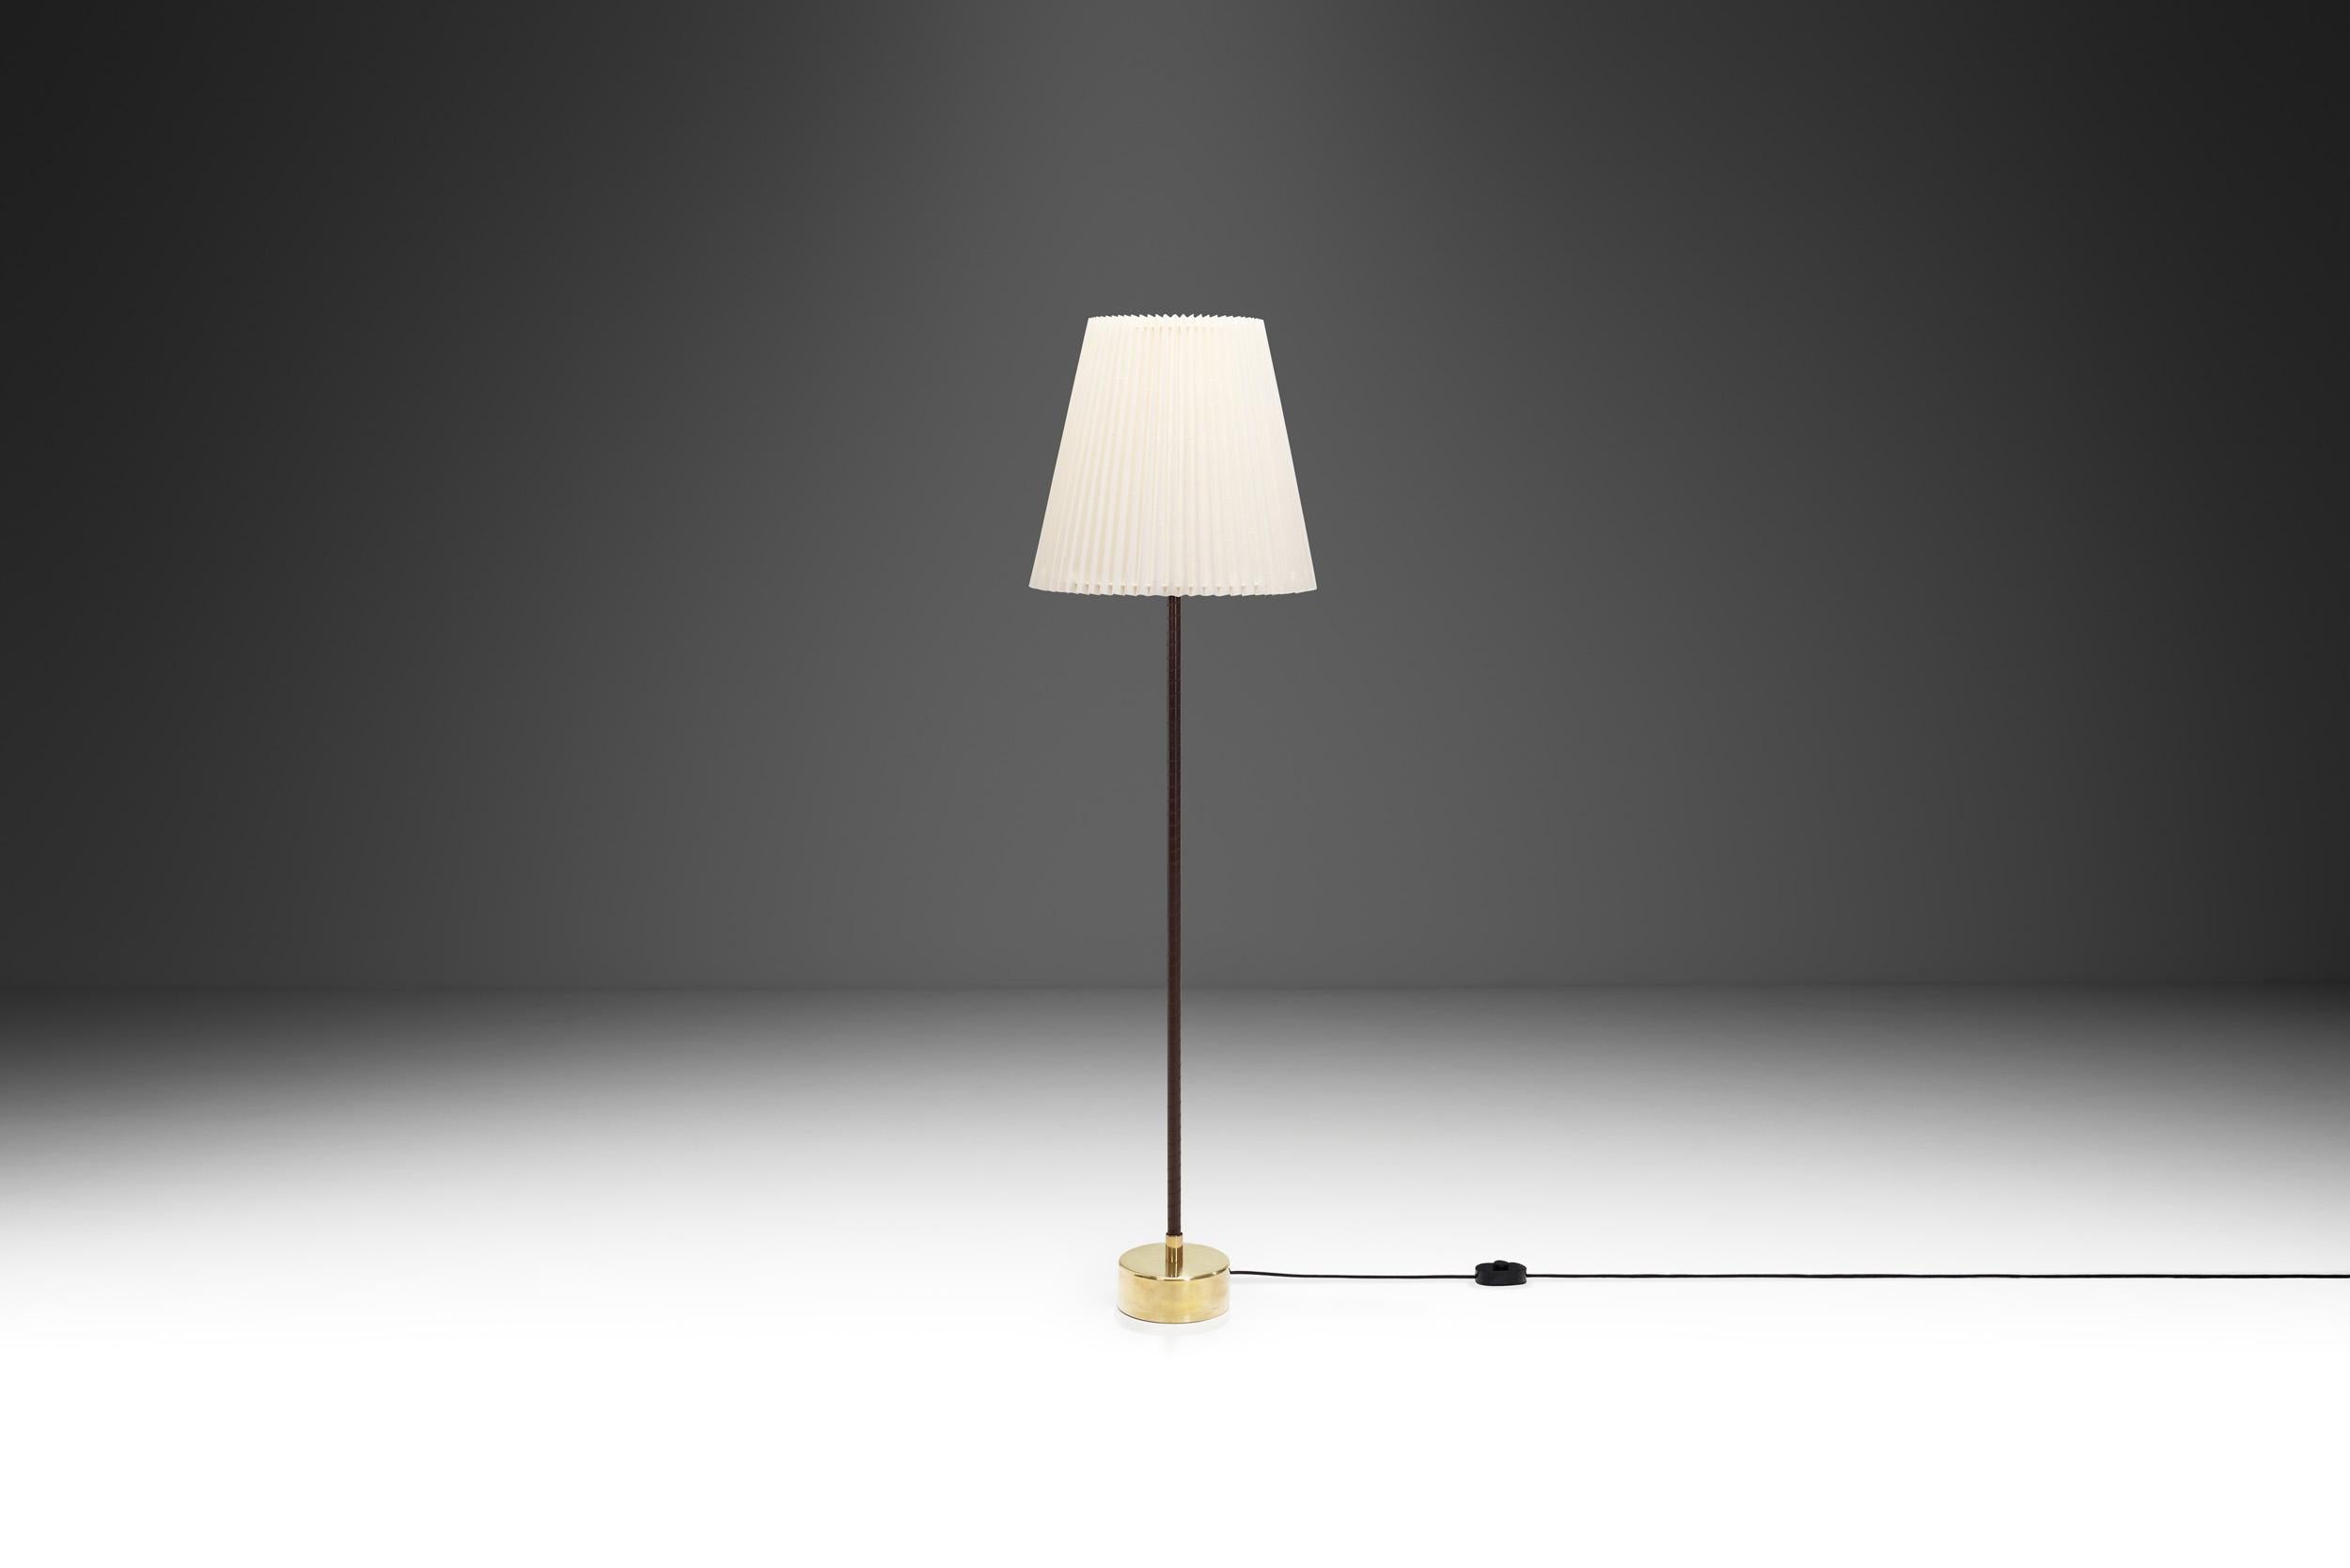 Mid-20th Century Lisa Johansson-Pape Brass Floor Lamp for Stockmann Orno, Finland 1950s For Sale